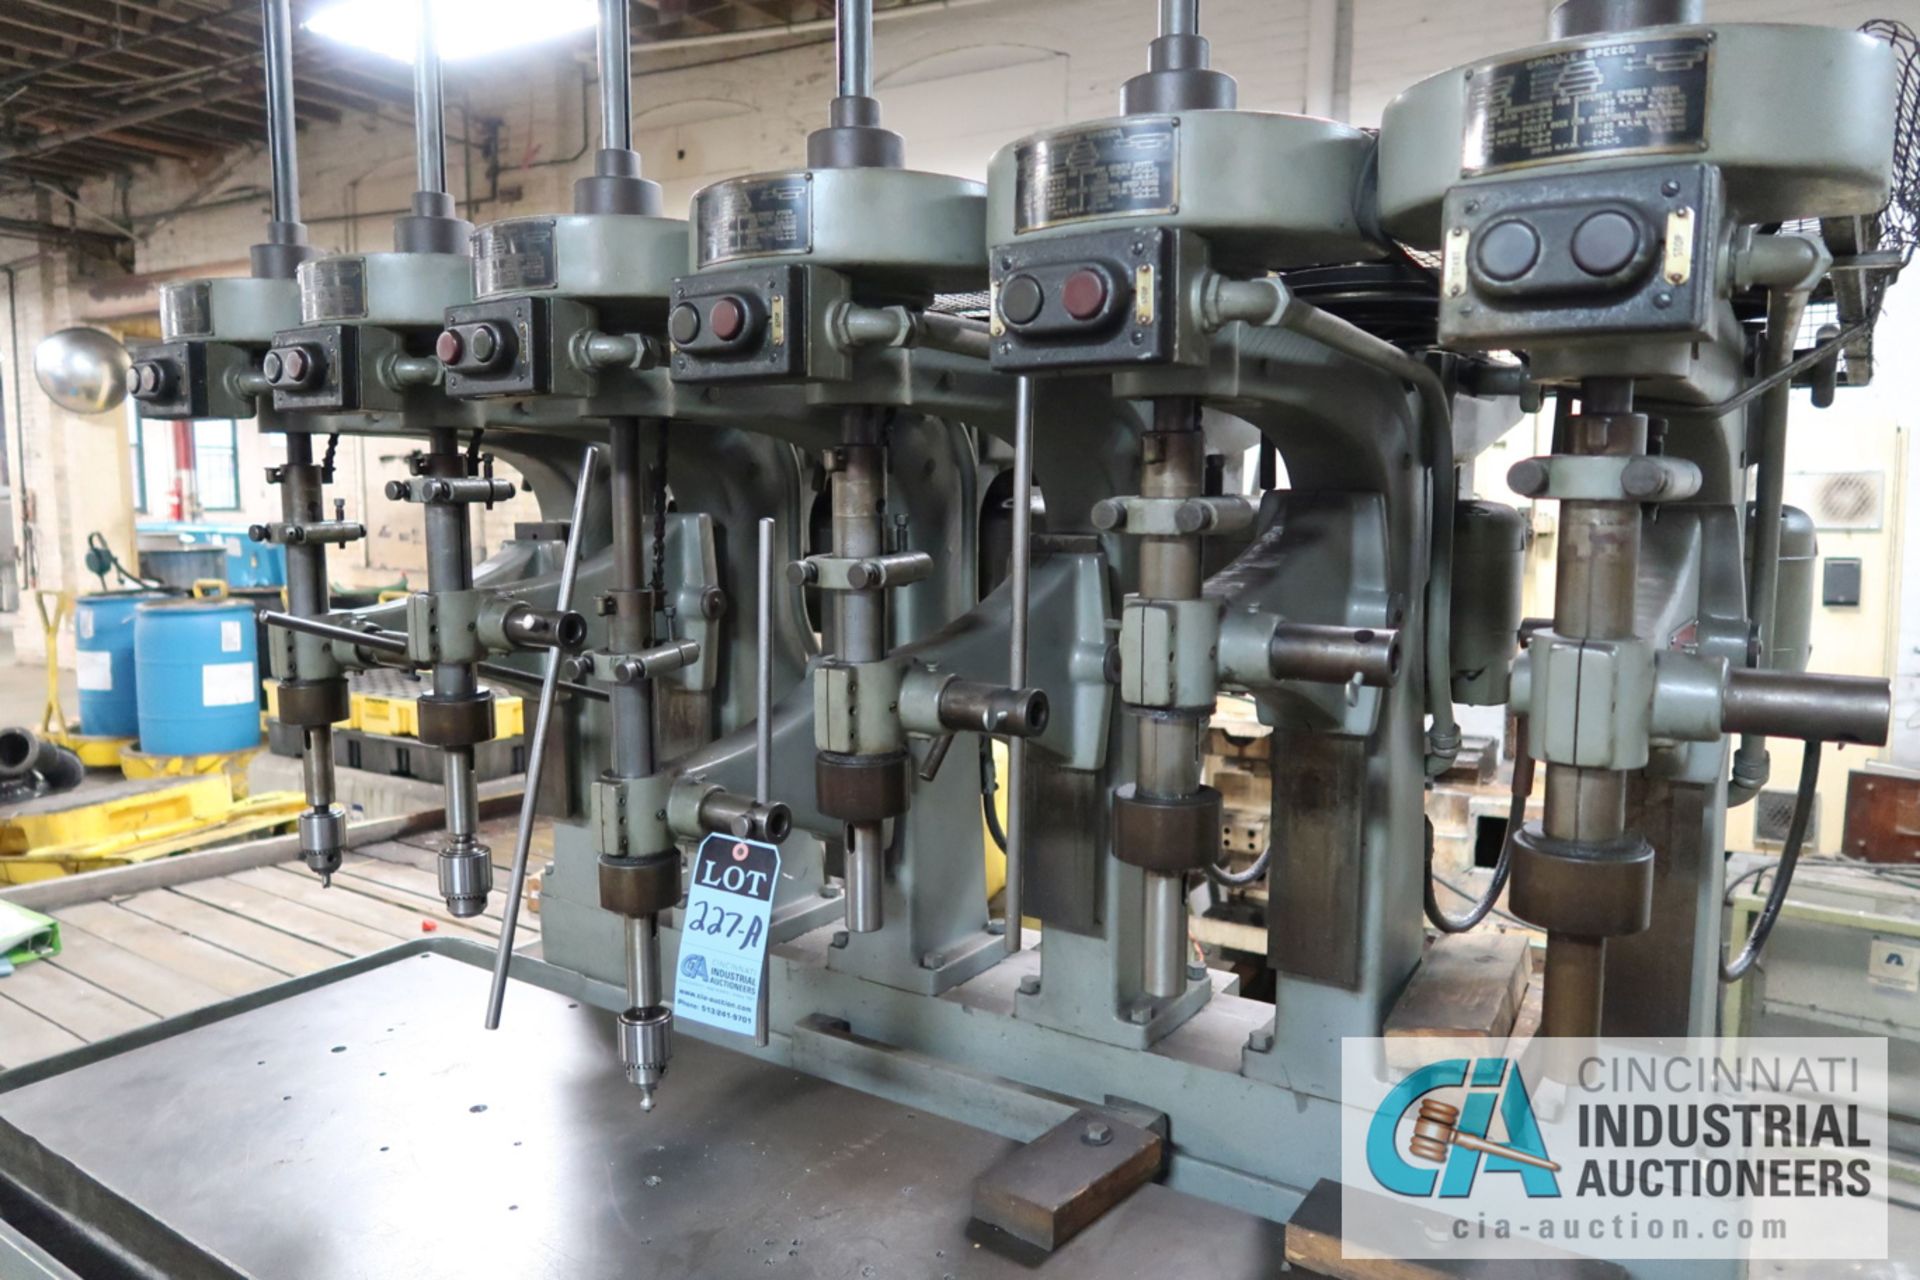 SIX-SPINDLE ALLEN MULTI SPEED DRILL, SPINDLE SPEED 170-3,500 RPM - Image 2 of 6